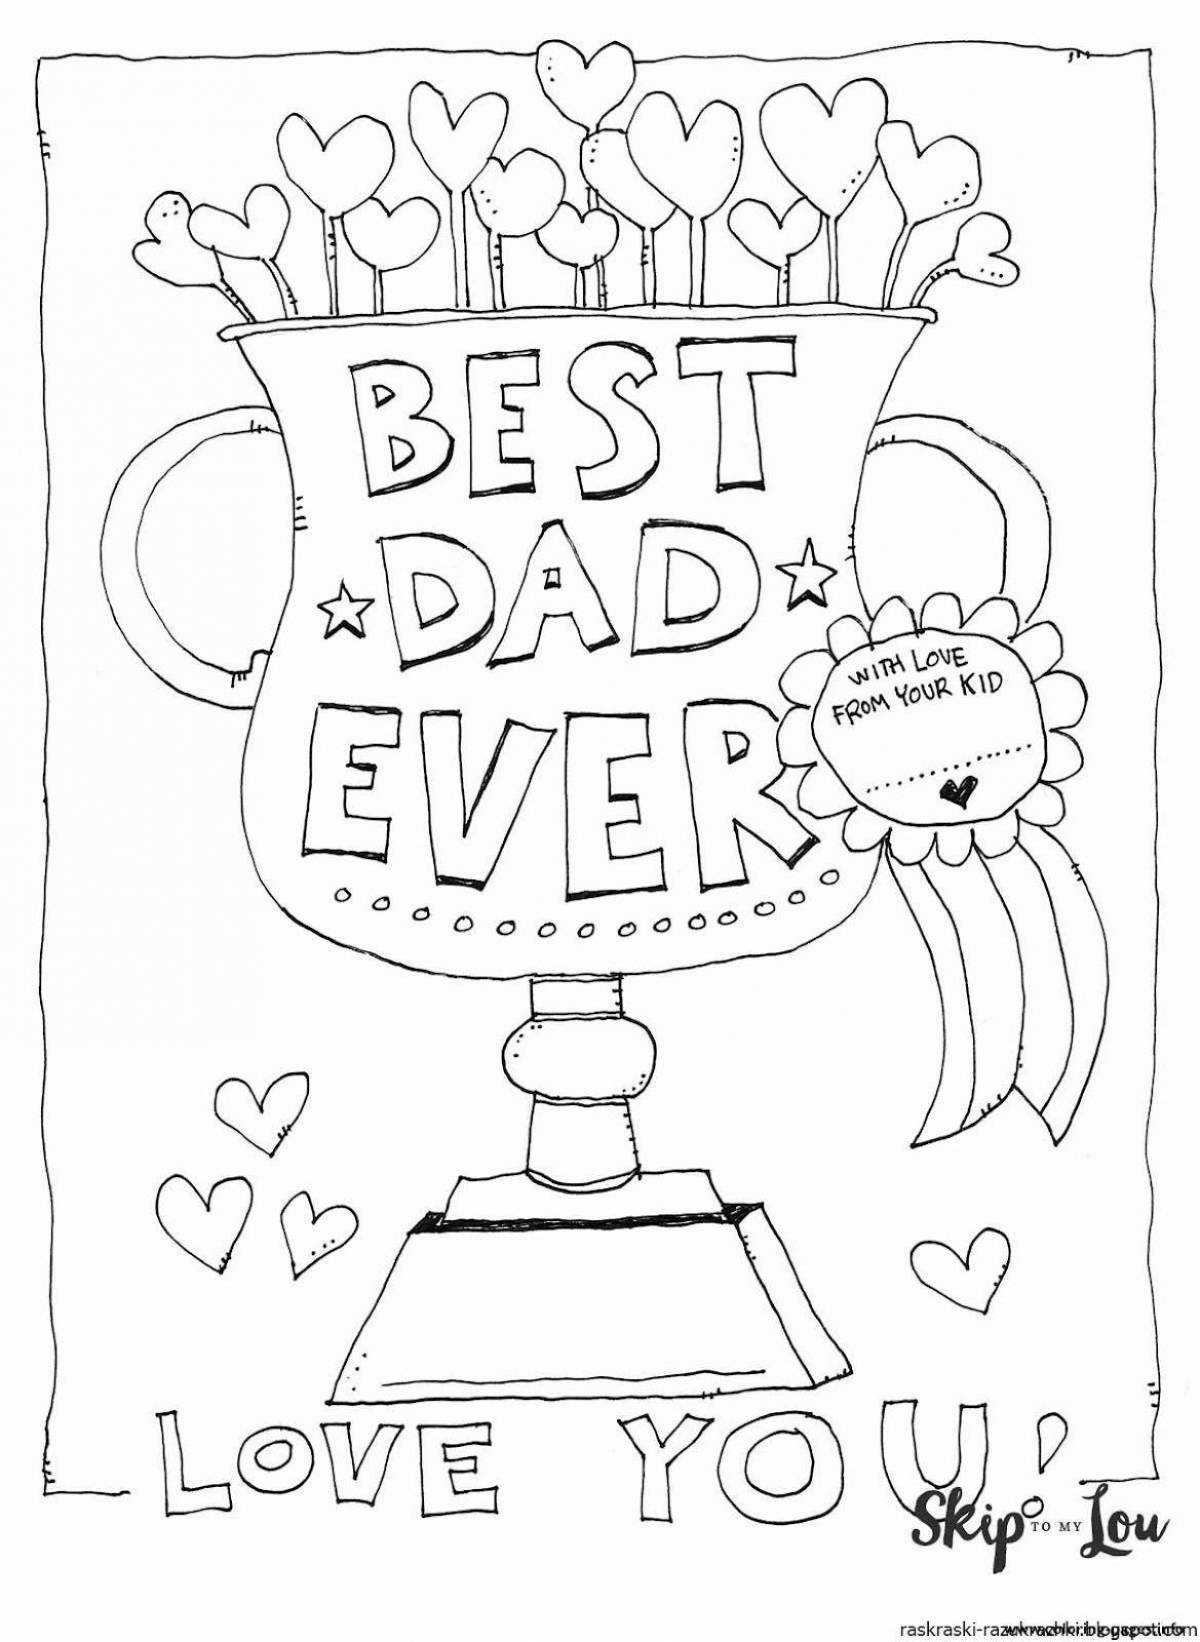 Friendly coloring for dad's birthday from daughter